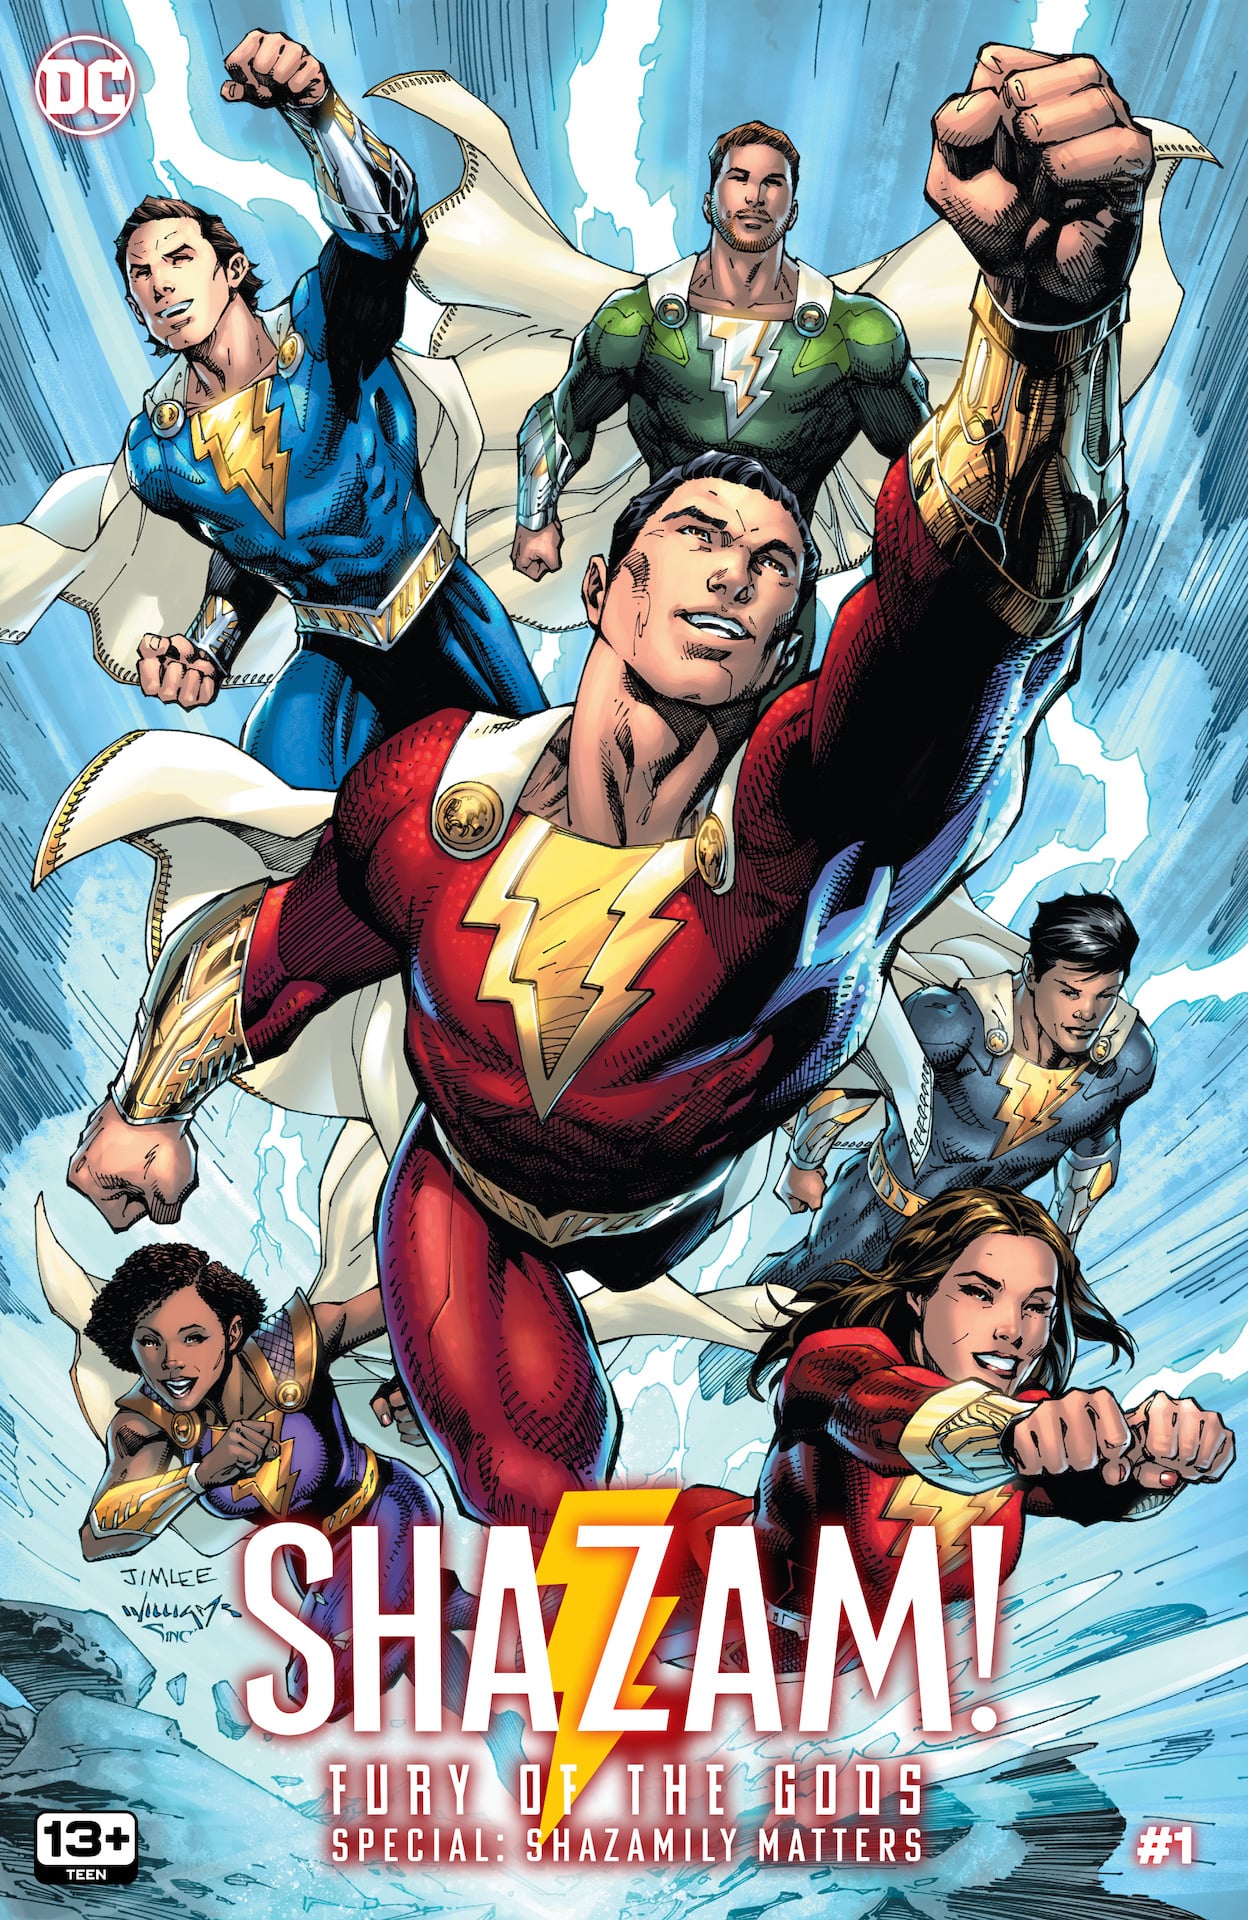 DC Preview: Shazam! Fury of the Gods Special: Shazamily Matters #1